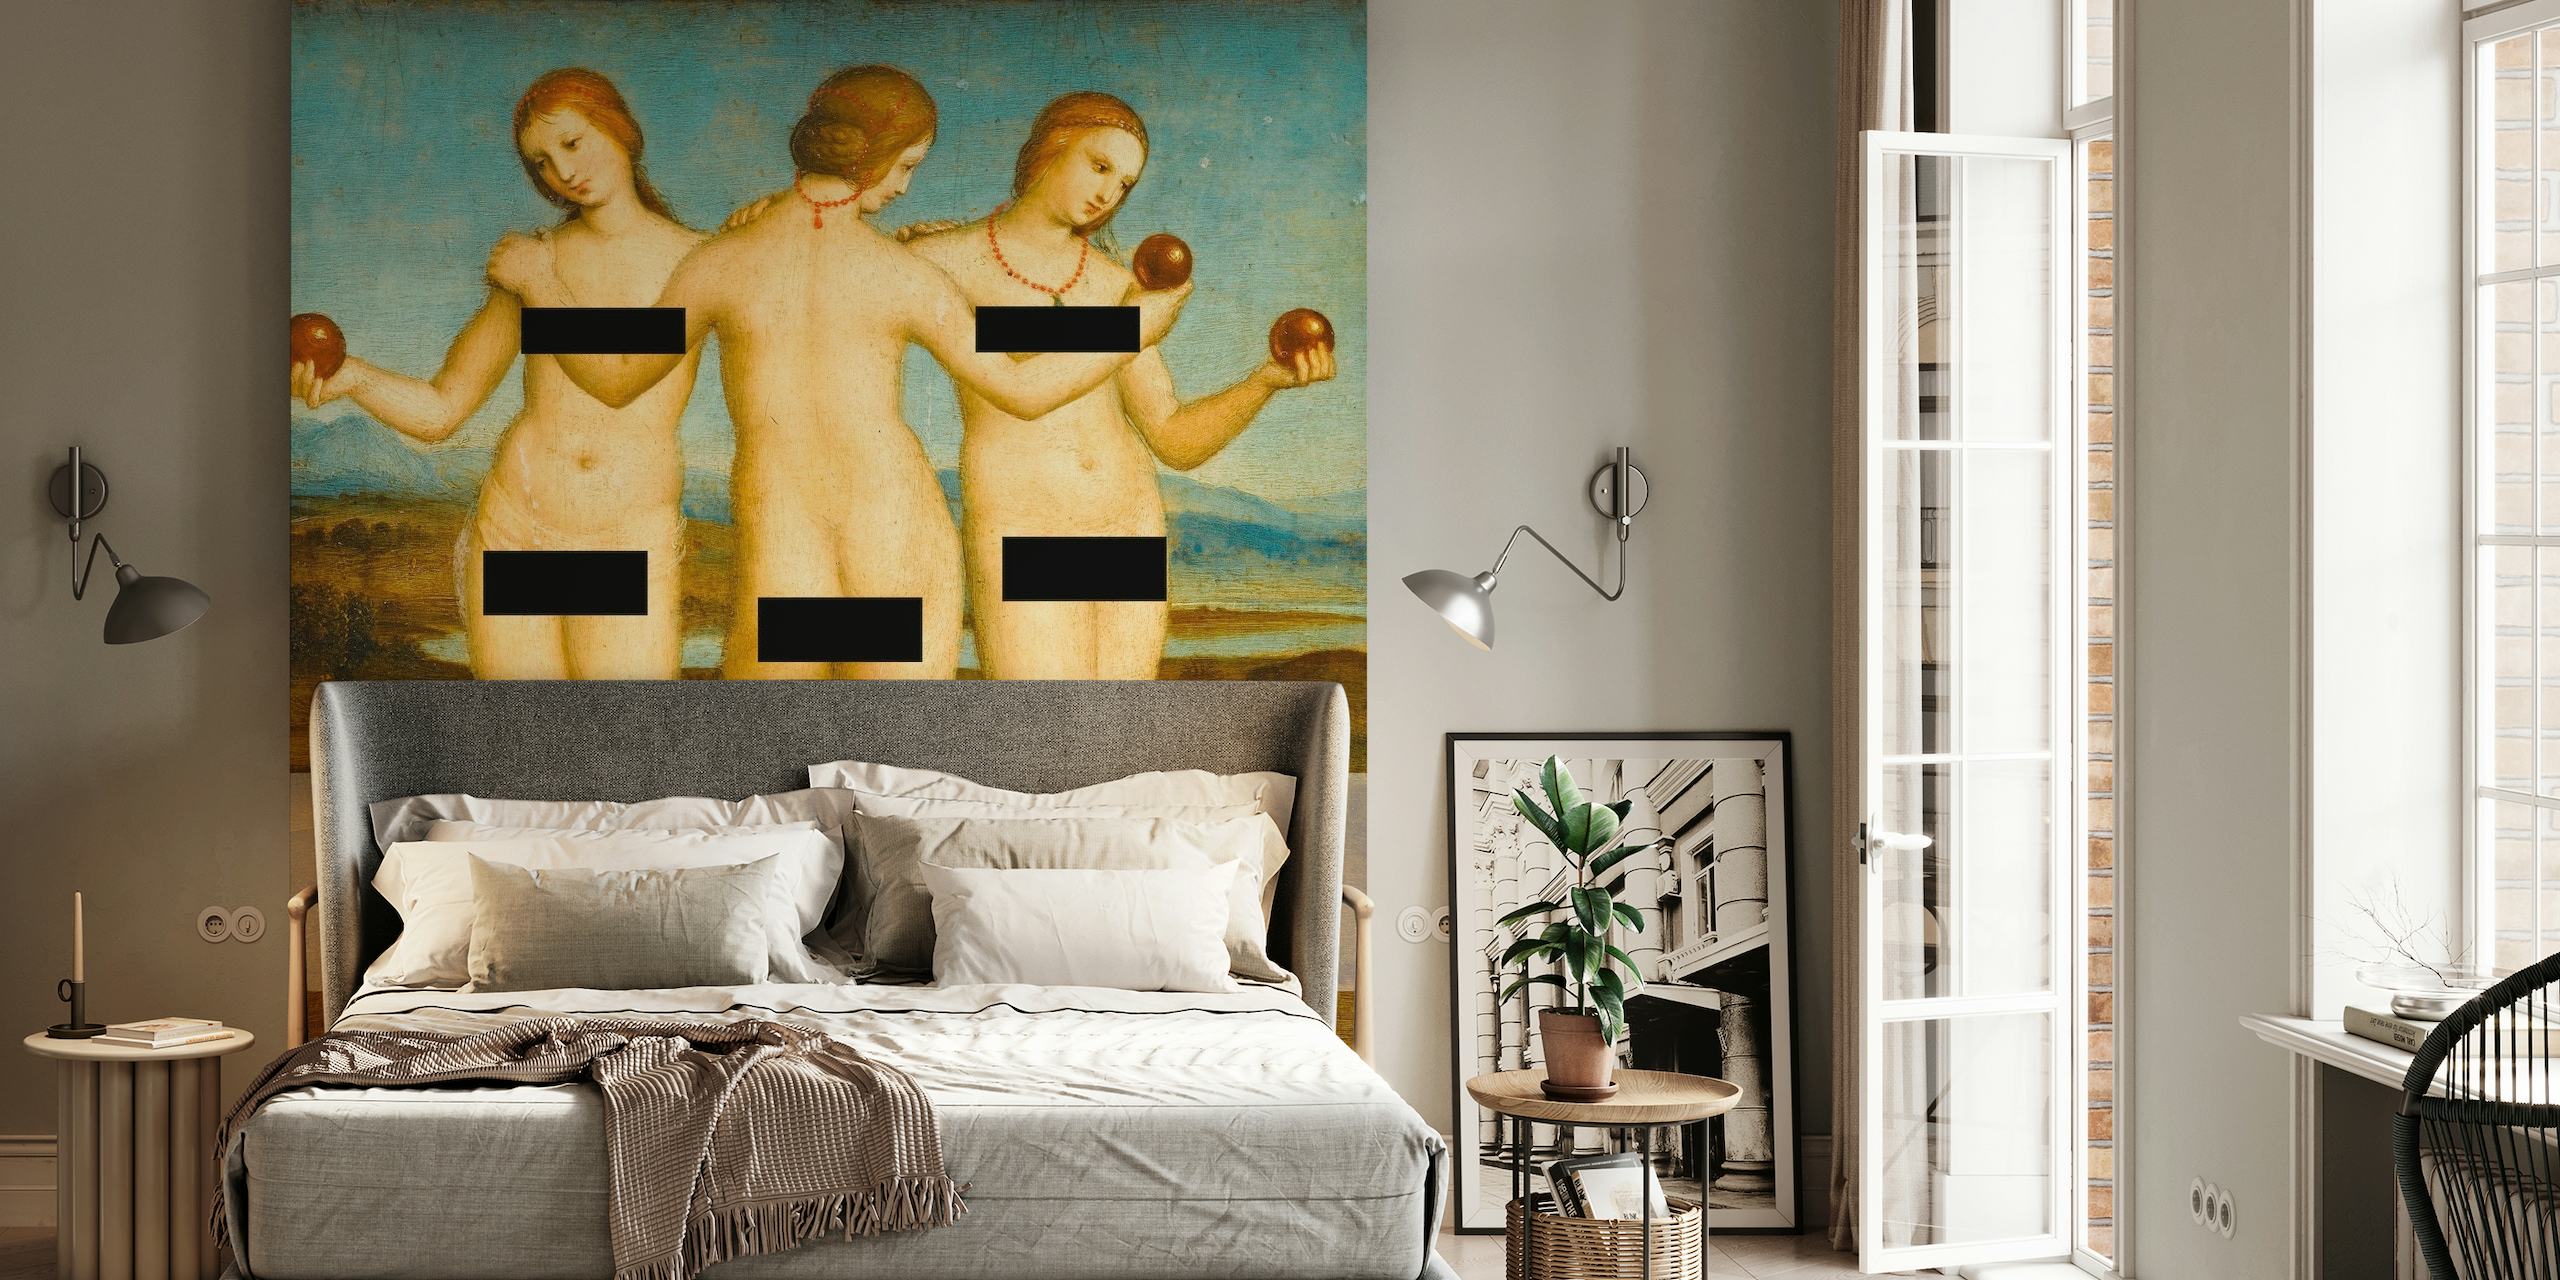 Censored image of the mythological Three Graces in a classical painting wall mural for home décor